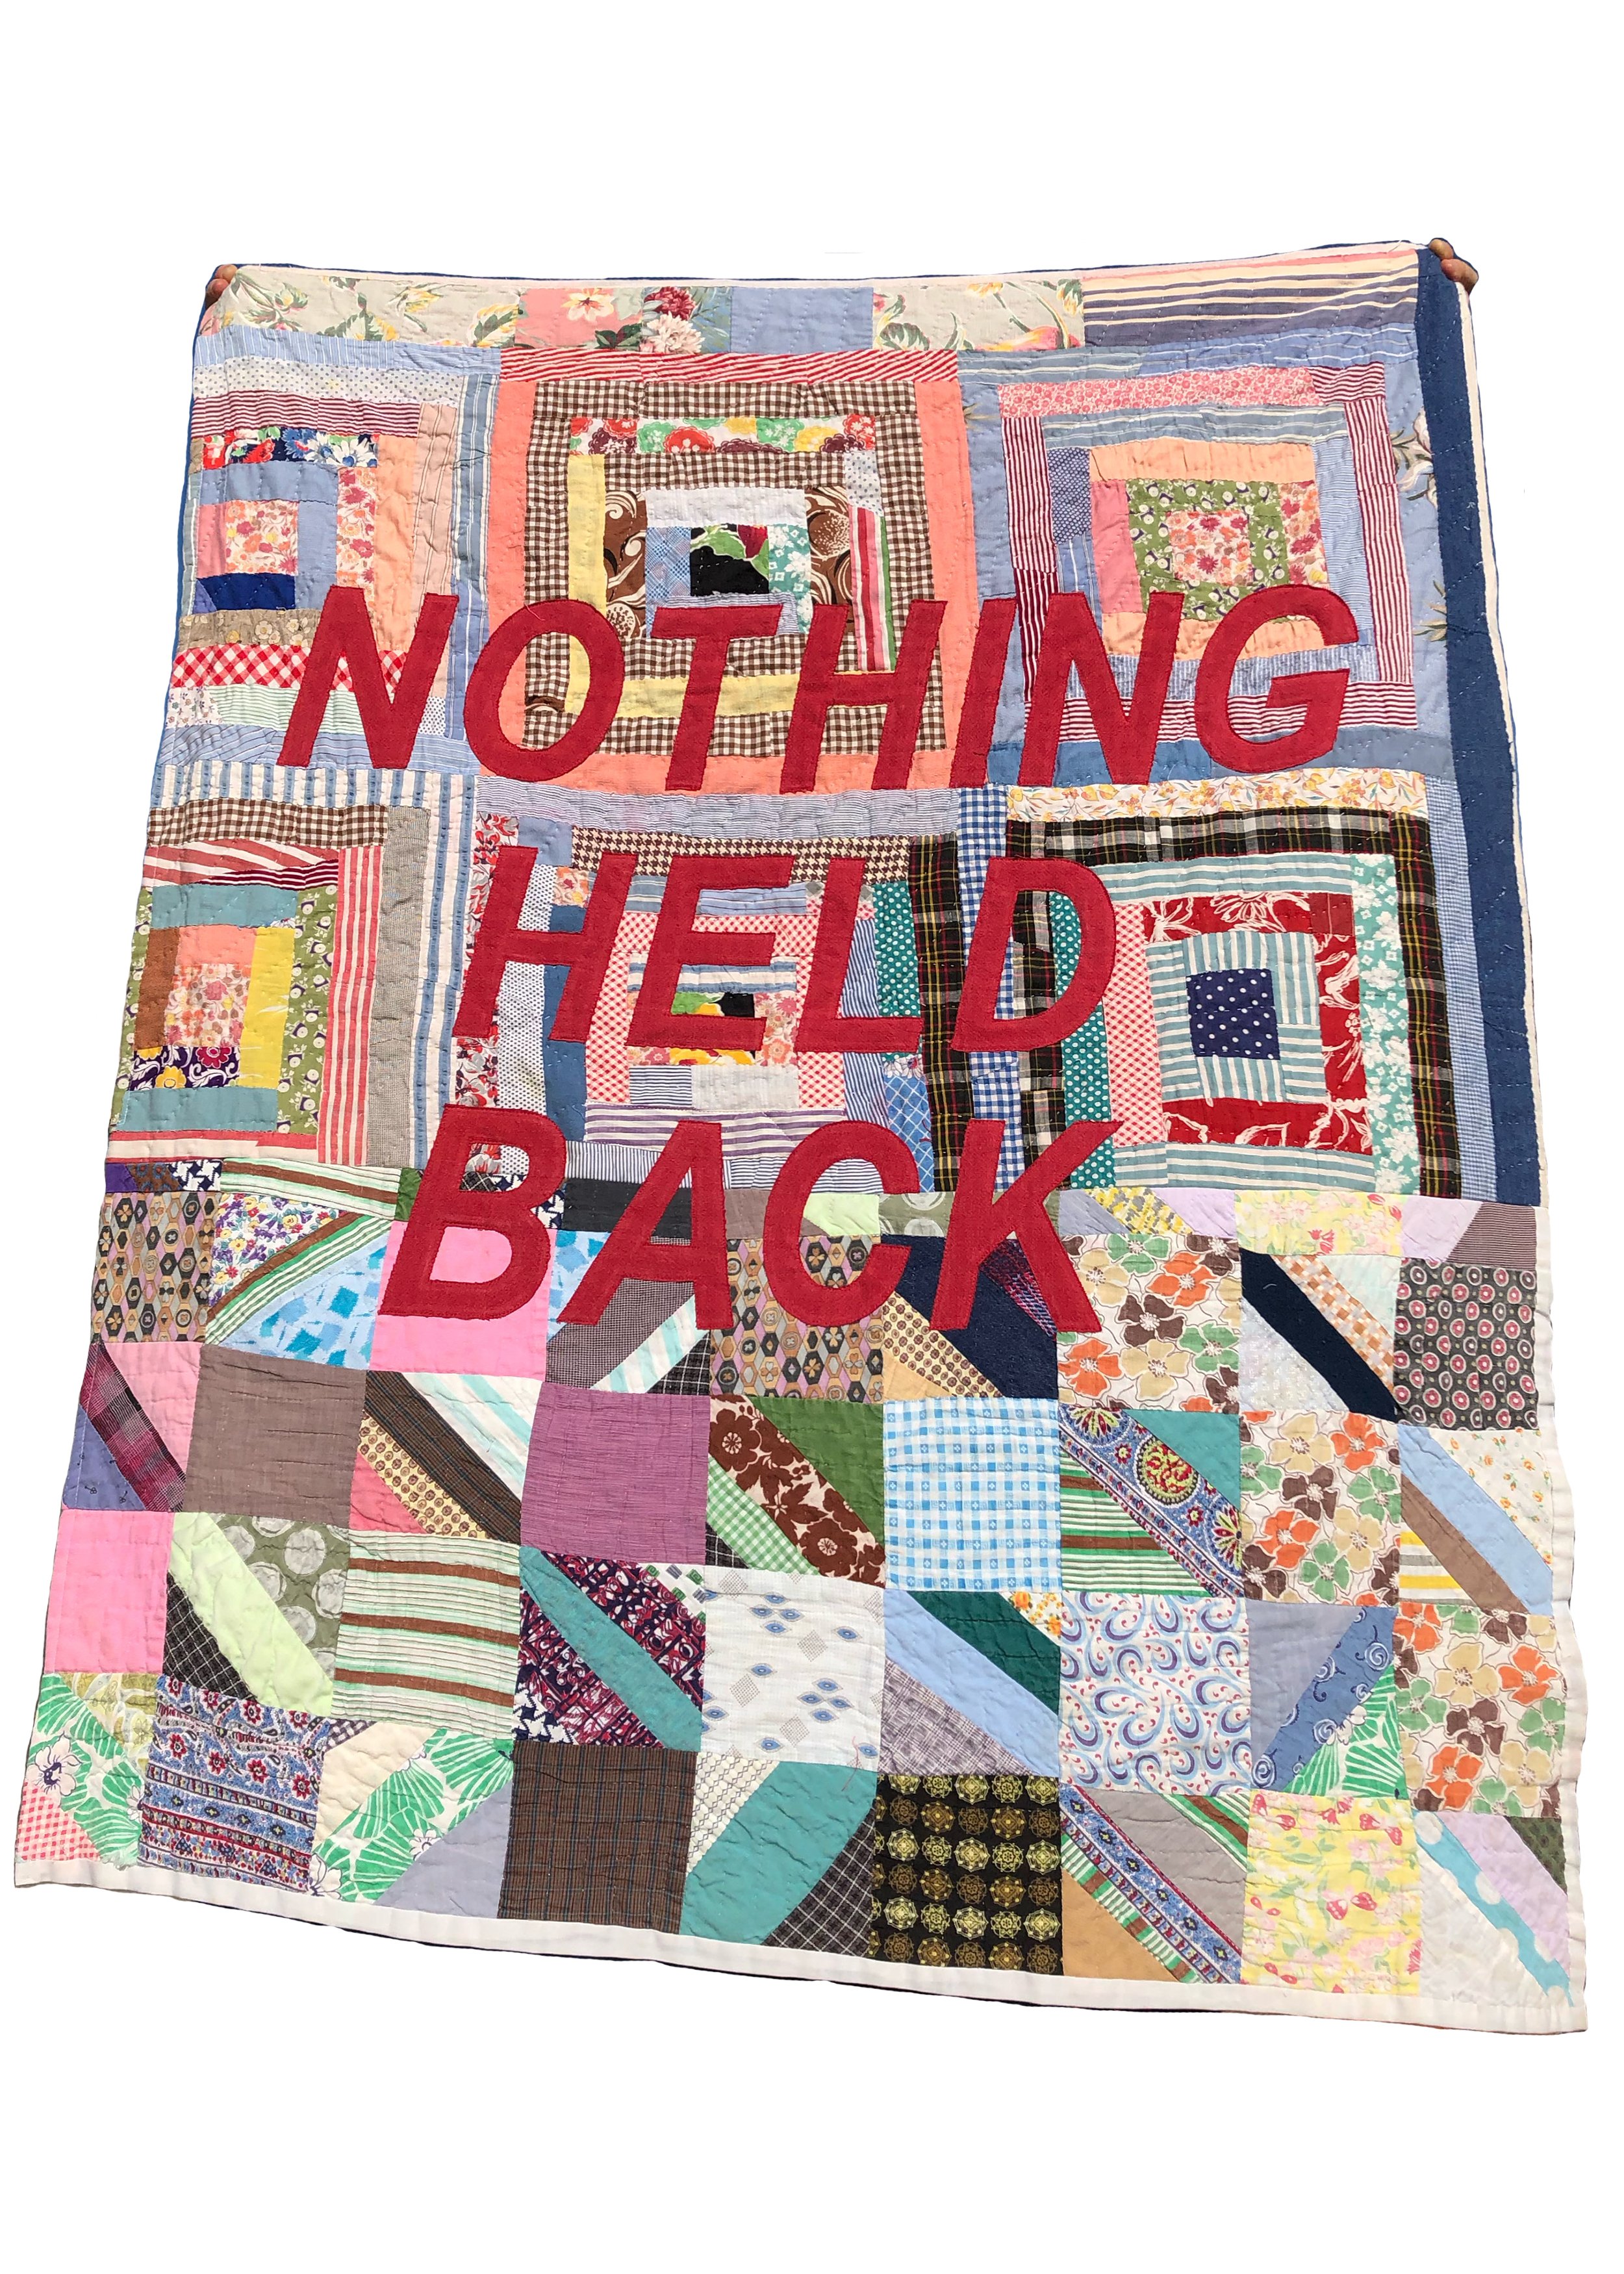  mended and patched sections of 2 quilts, vintage fabric, letters cut from tablecloth, 2021,  sold  